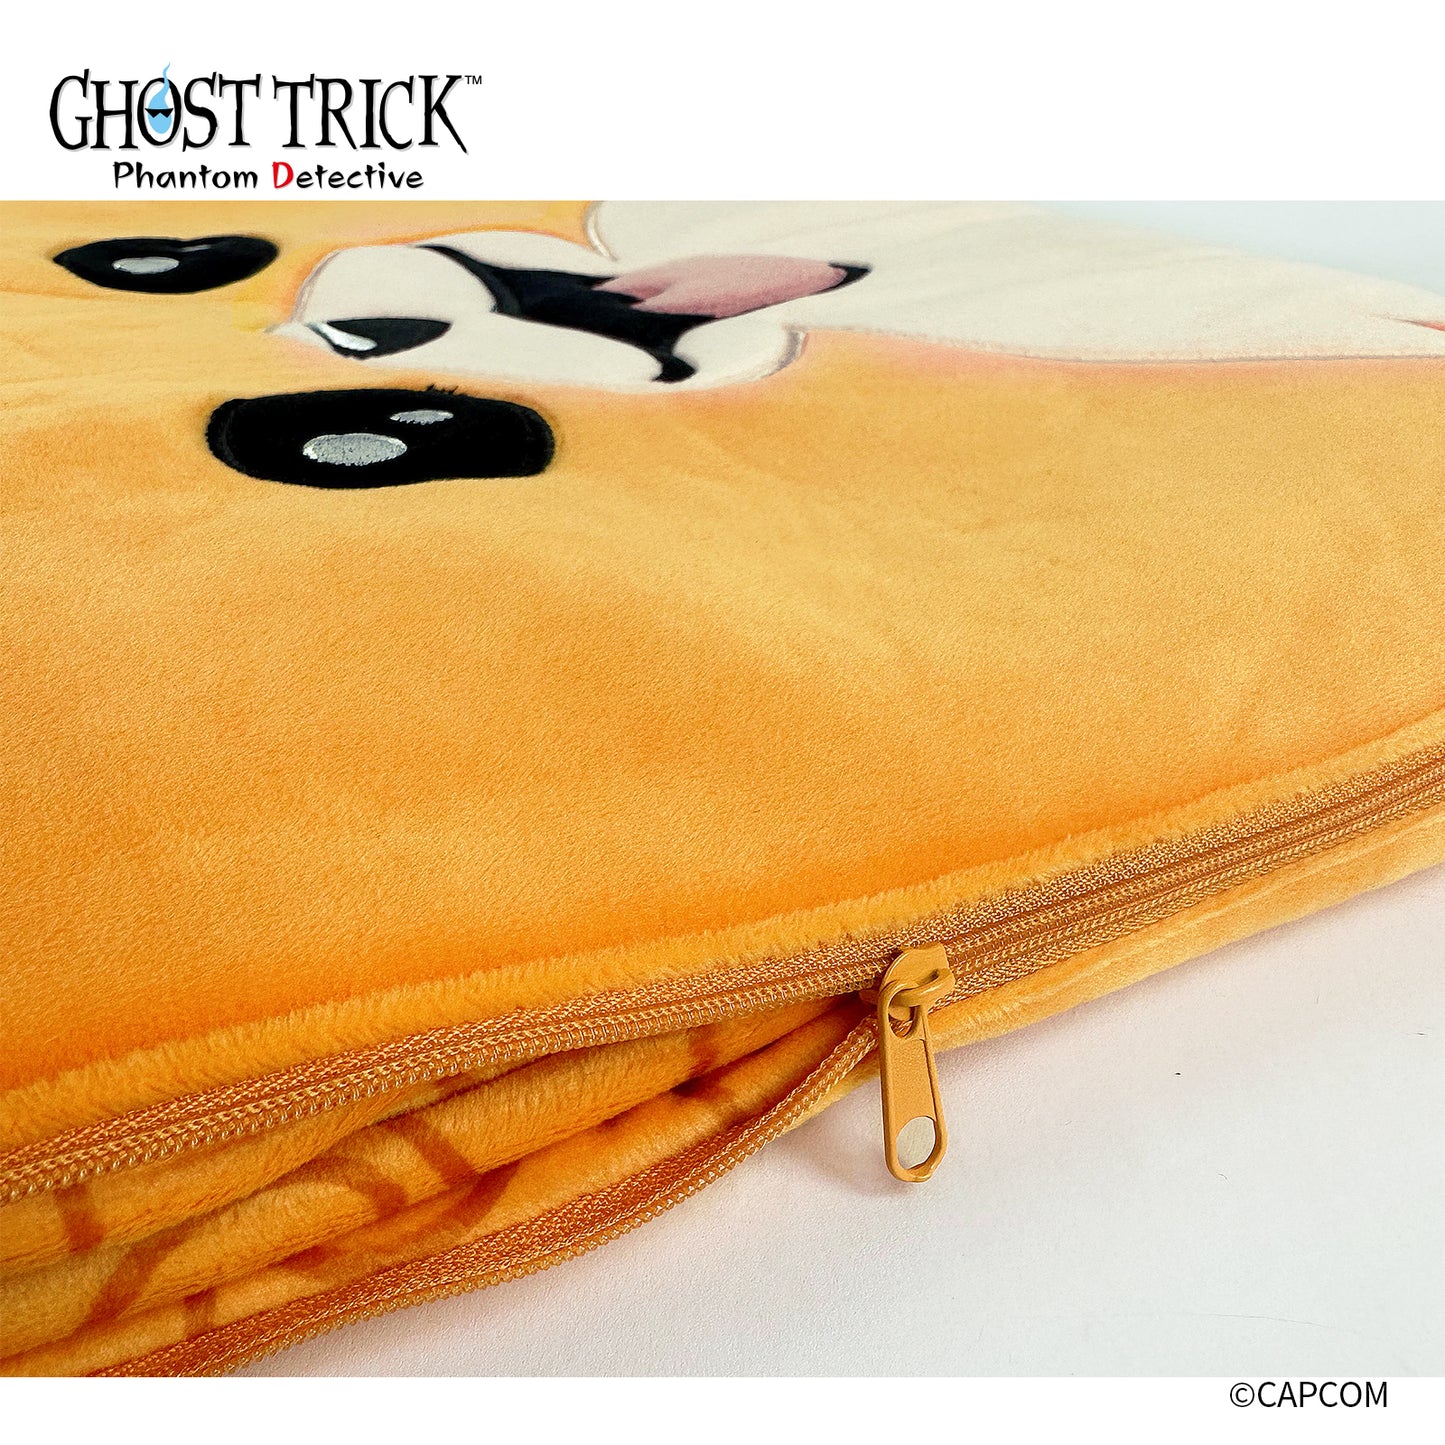 Ghost Trick Foldable Blanket